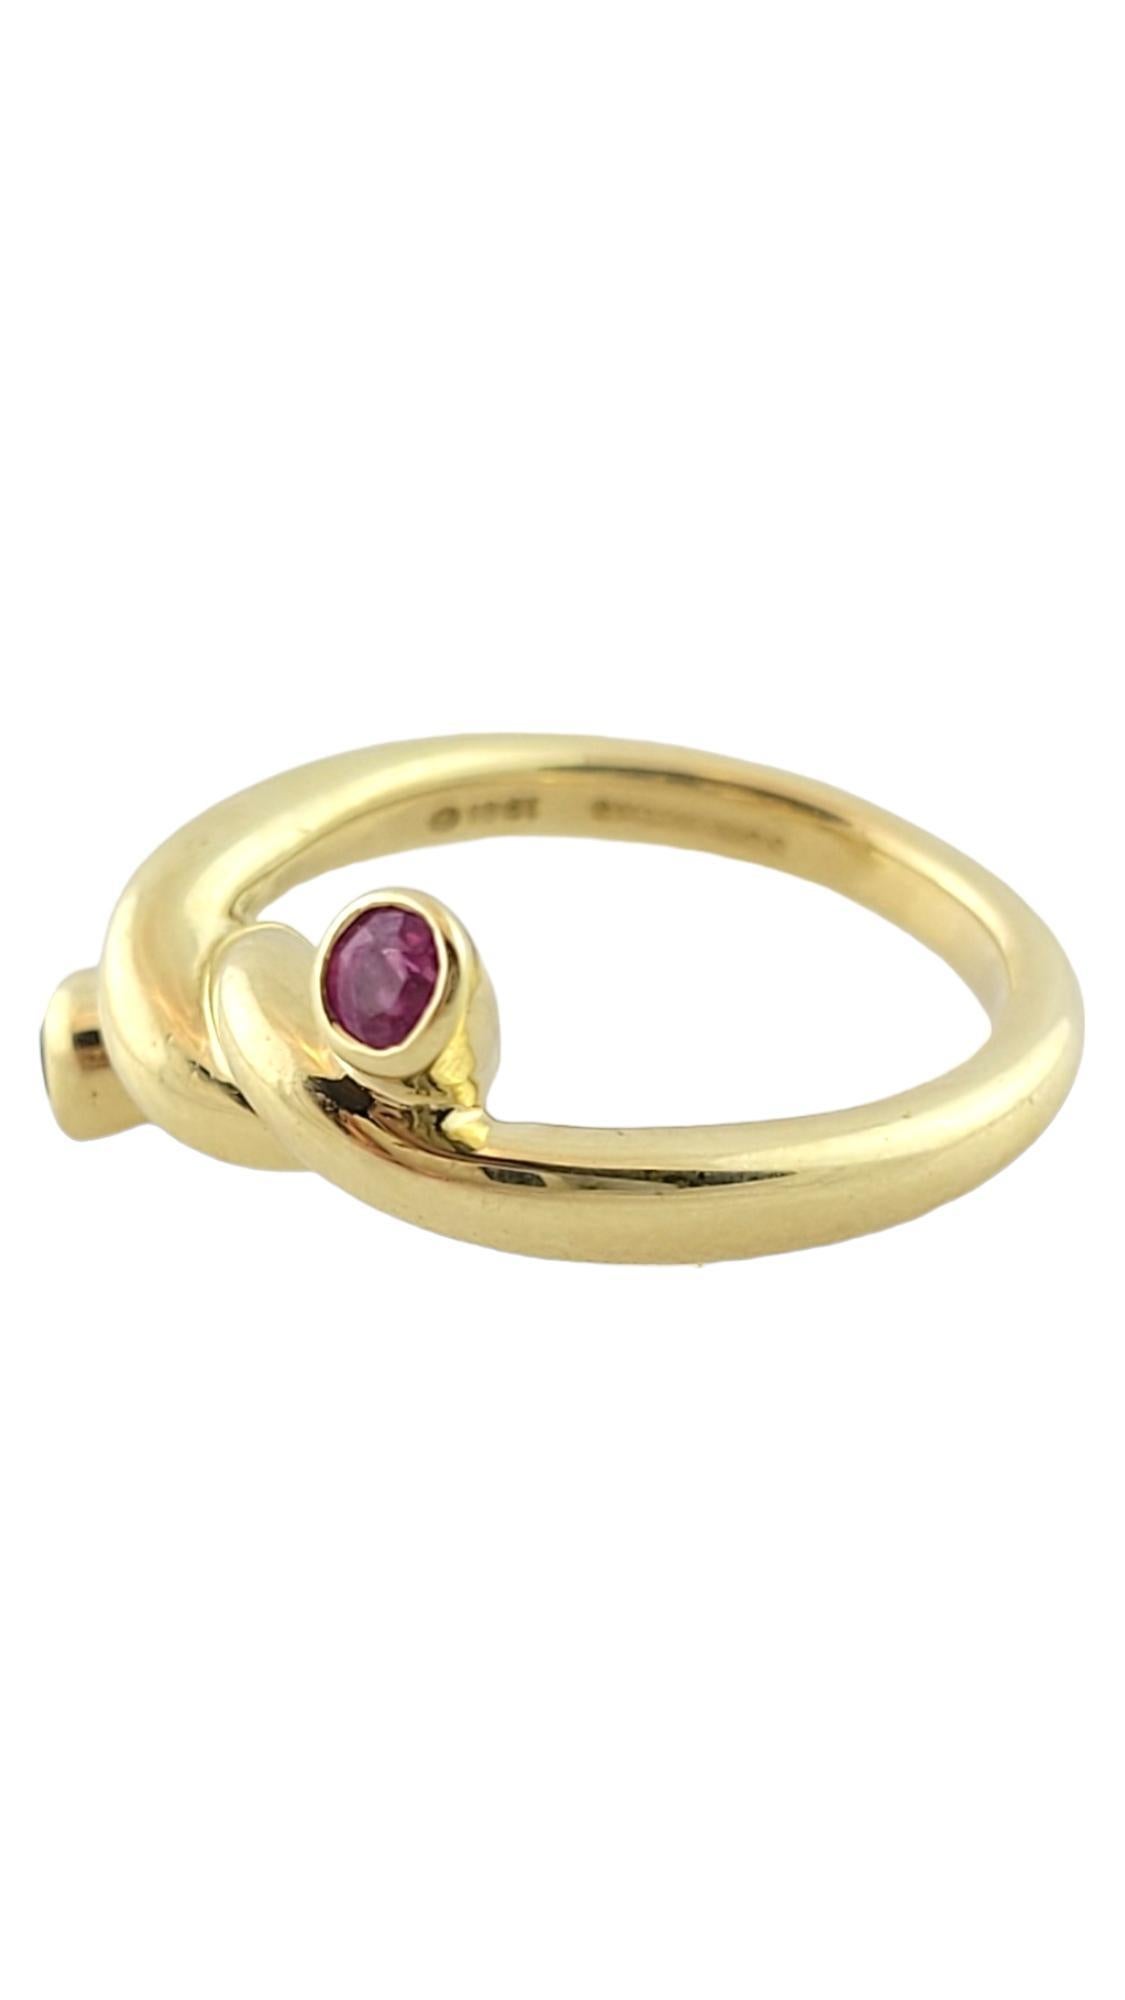 Vintage Angela Cummings 18K Yellow Gold Ruby & Sapphire Ring Size 5.25

Gorgeous designer ring by Angela Cummings with a beautiful ruby and sapphire stone set into a unique 18K gold twist band!

Ring size: 5.25
Shank: 2.63mm
Front: 7.54mm X